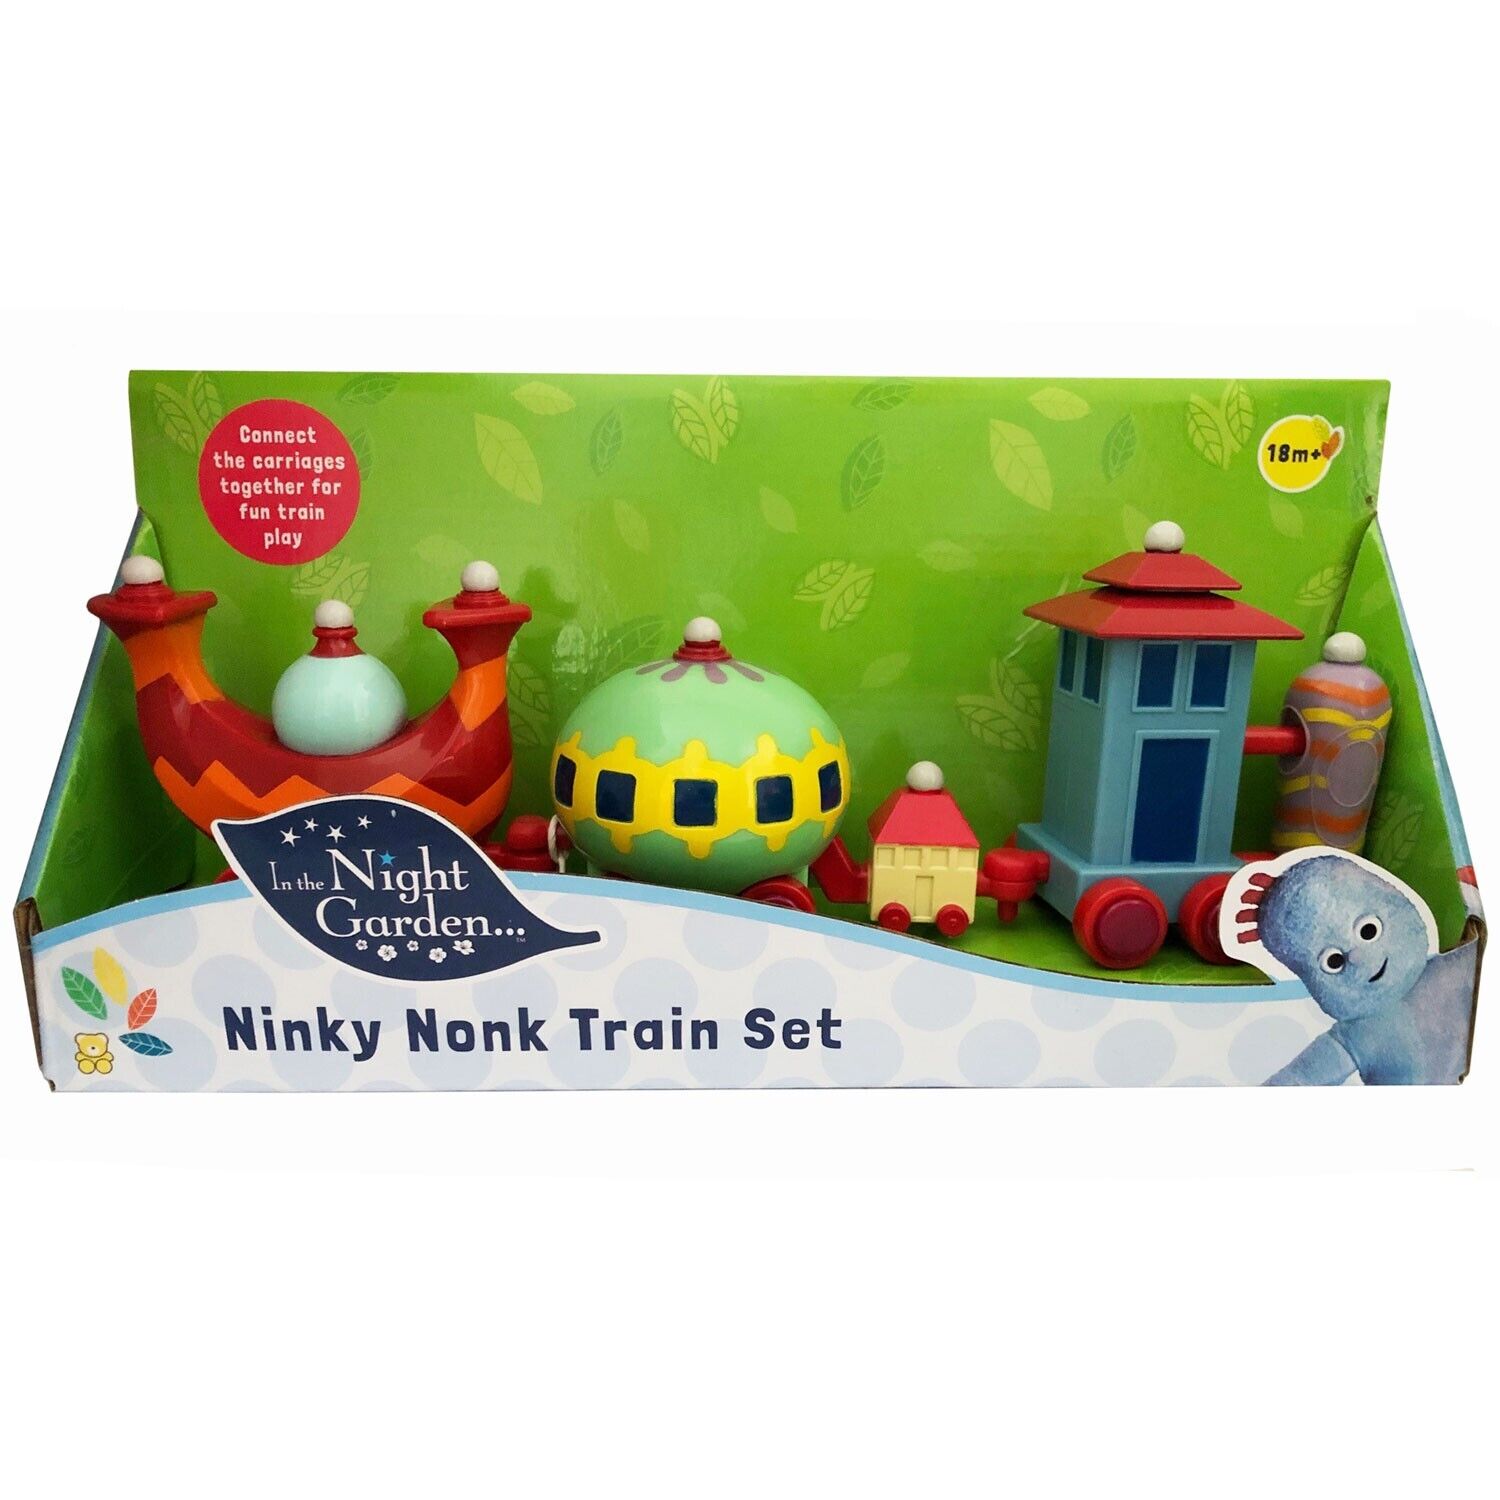 New In the Night Garden Ninky Nonk Train Set - Perfect Gift for Kids!